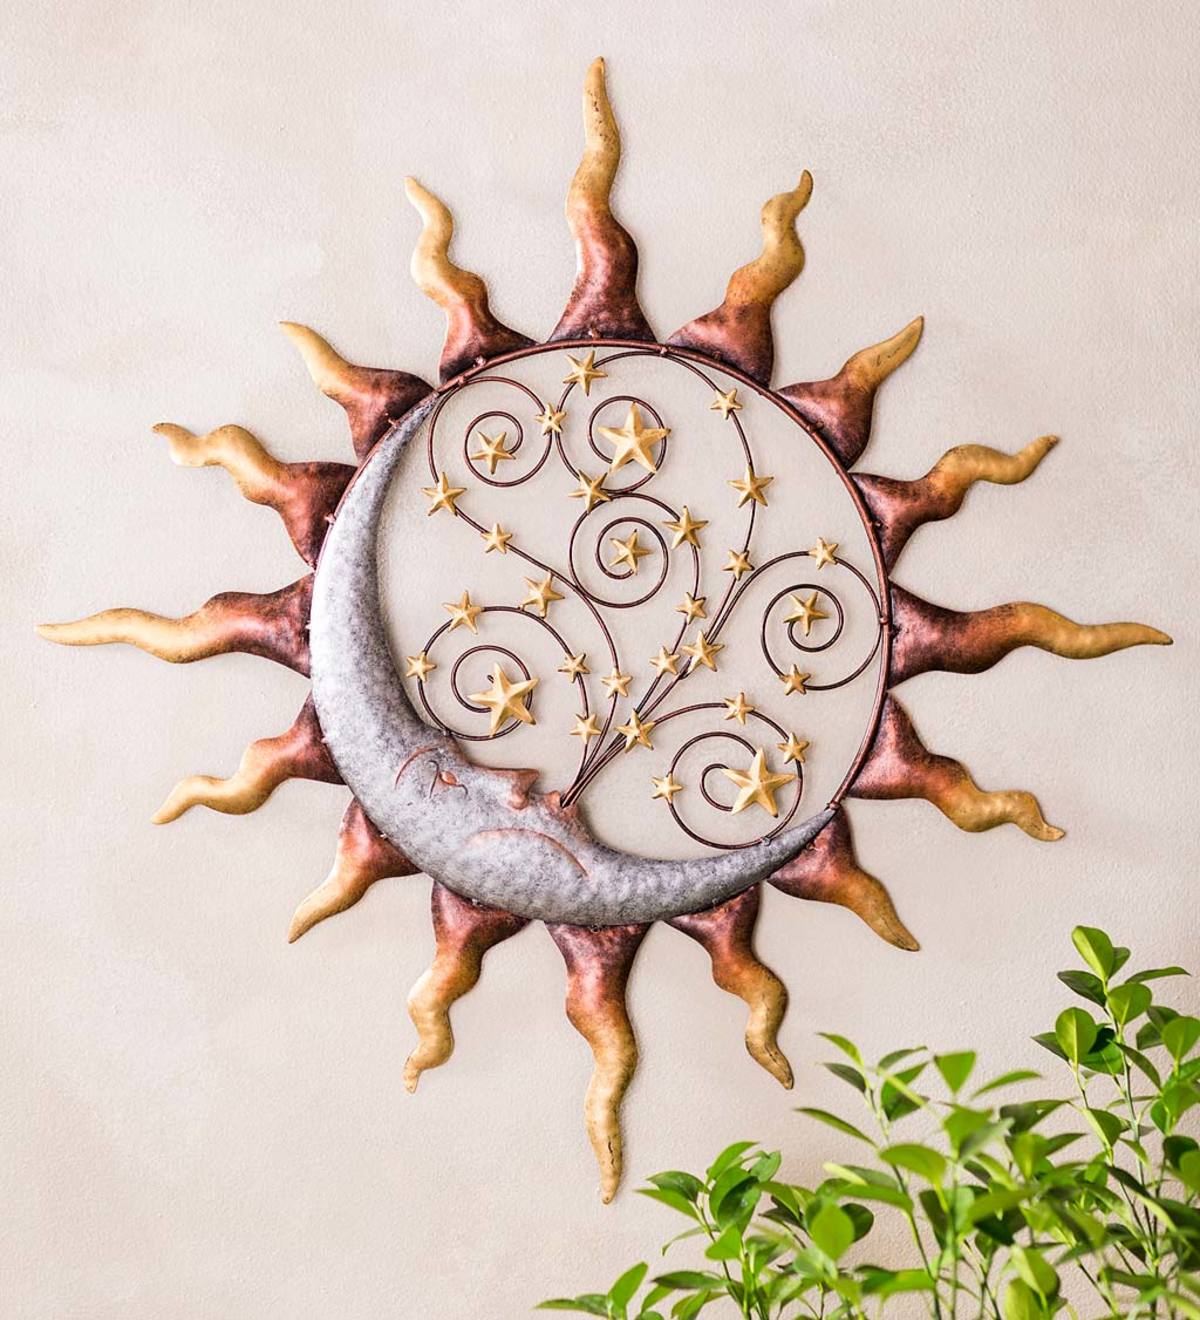 Artistic Sun and Moon Metal Wall Art Decor for Indoor or Outdoor Use.